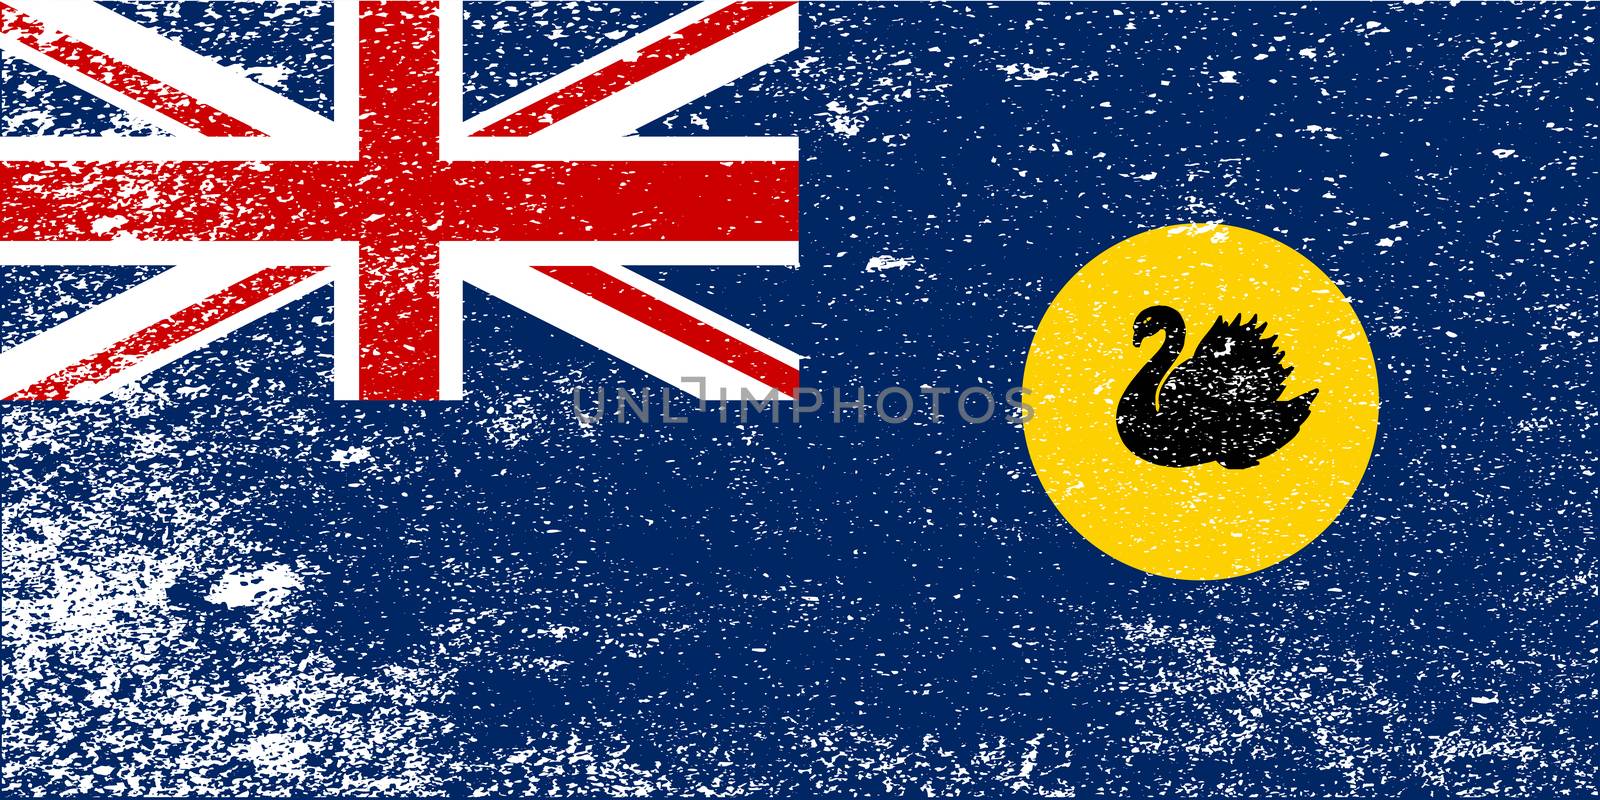 The flag of the state of Western Australia with grunge